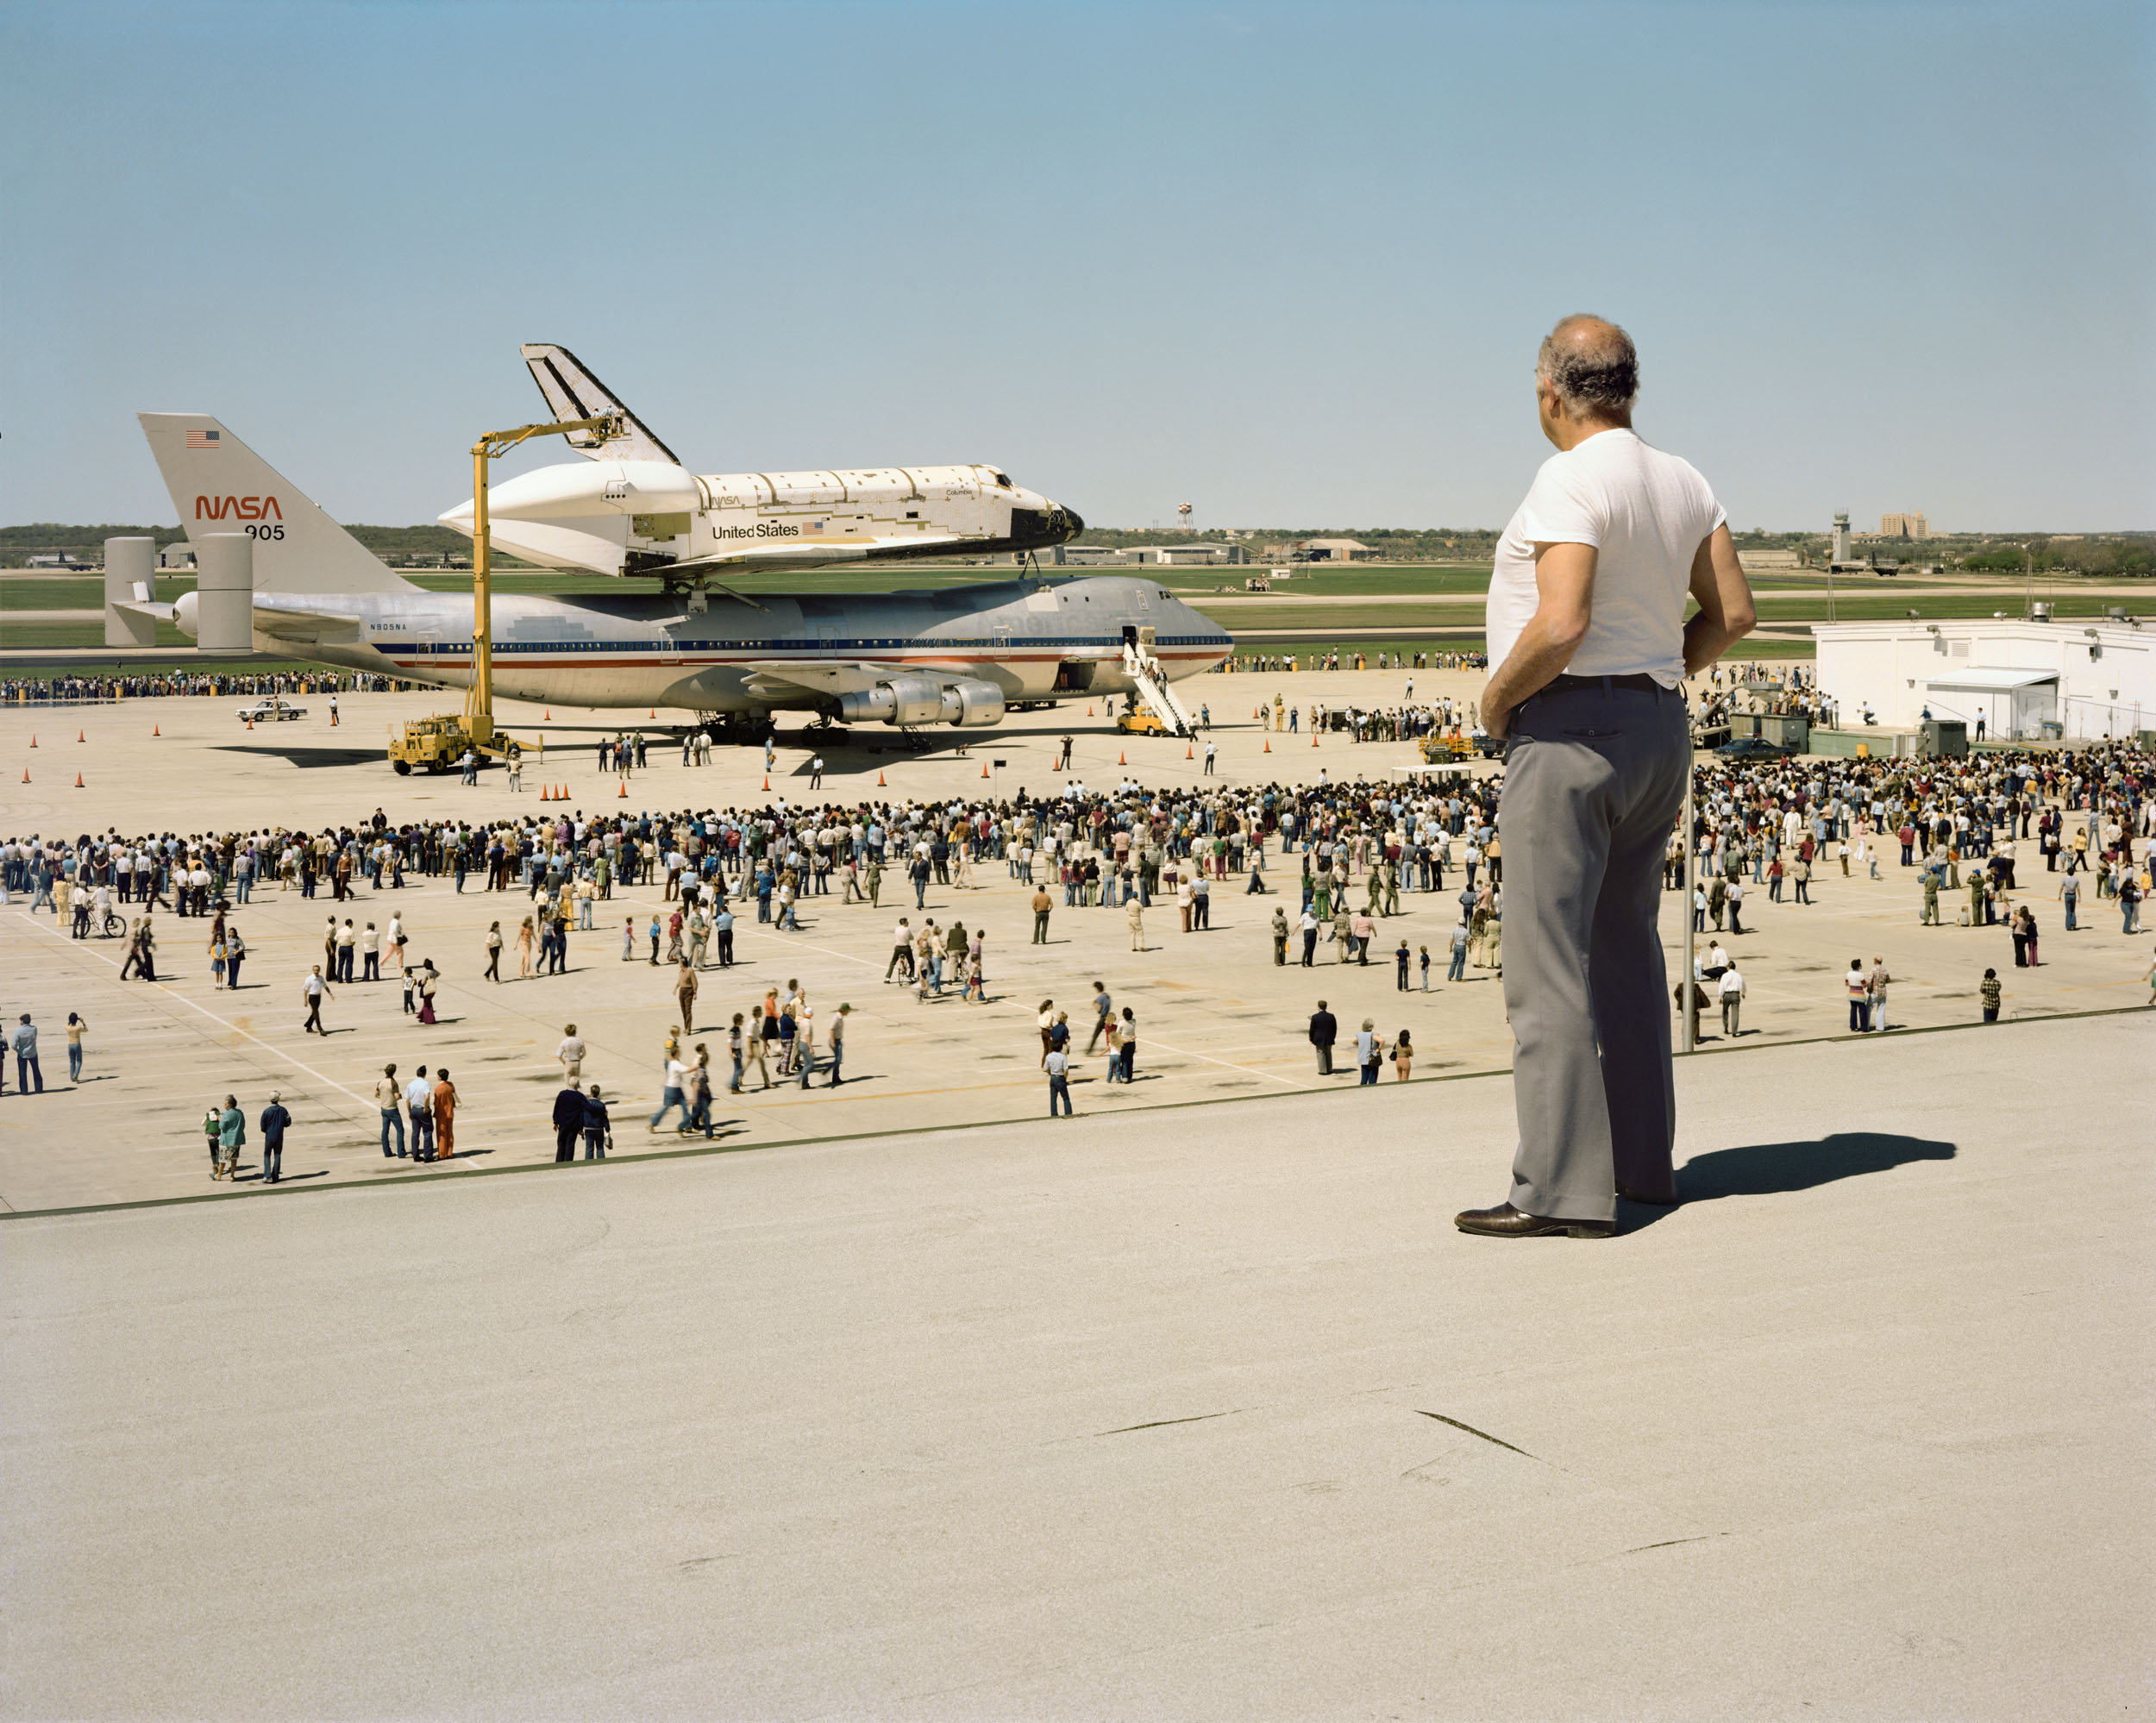 1_The Space Shuttle Columbia Lands at Kelly Air Force Base, San Antonio, Texas, March 1979.jpg